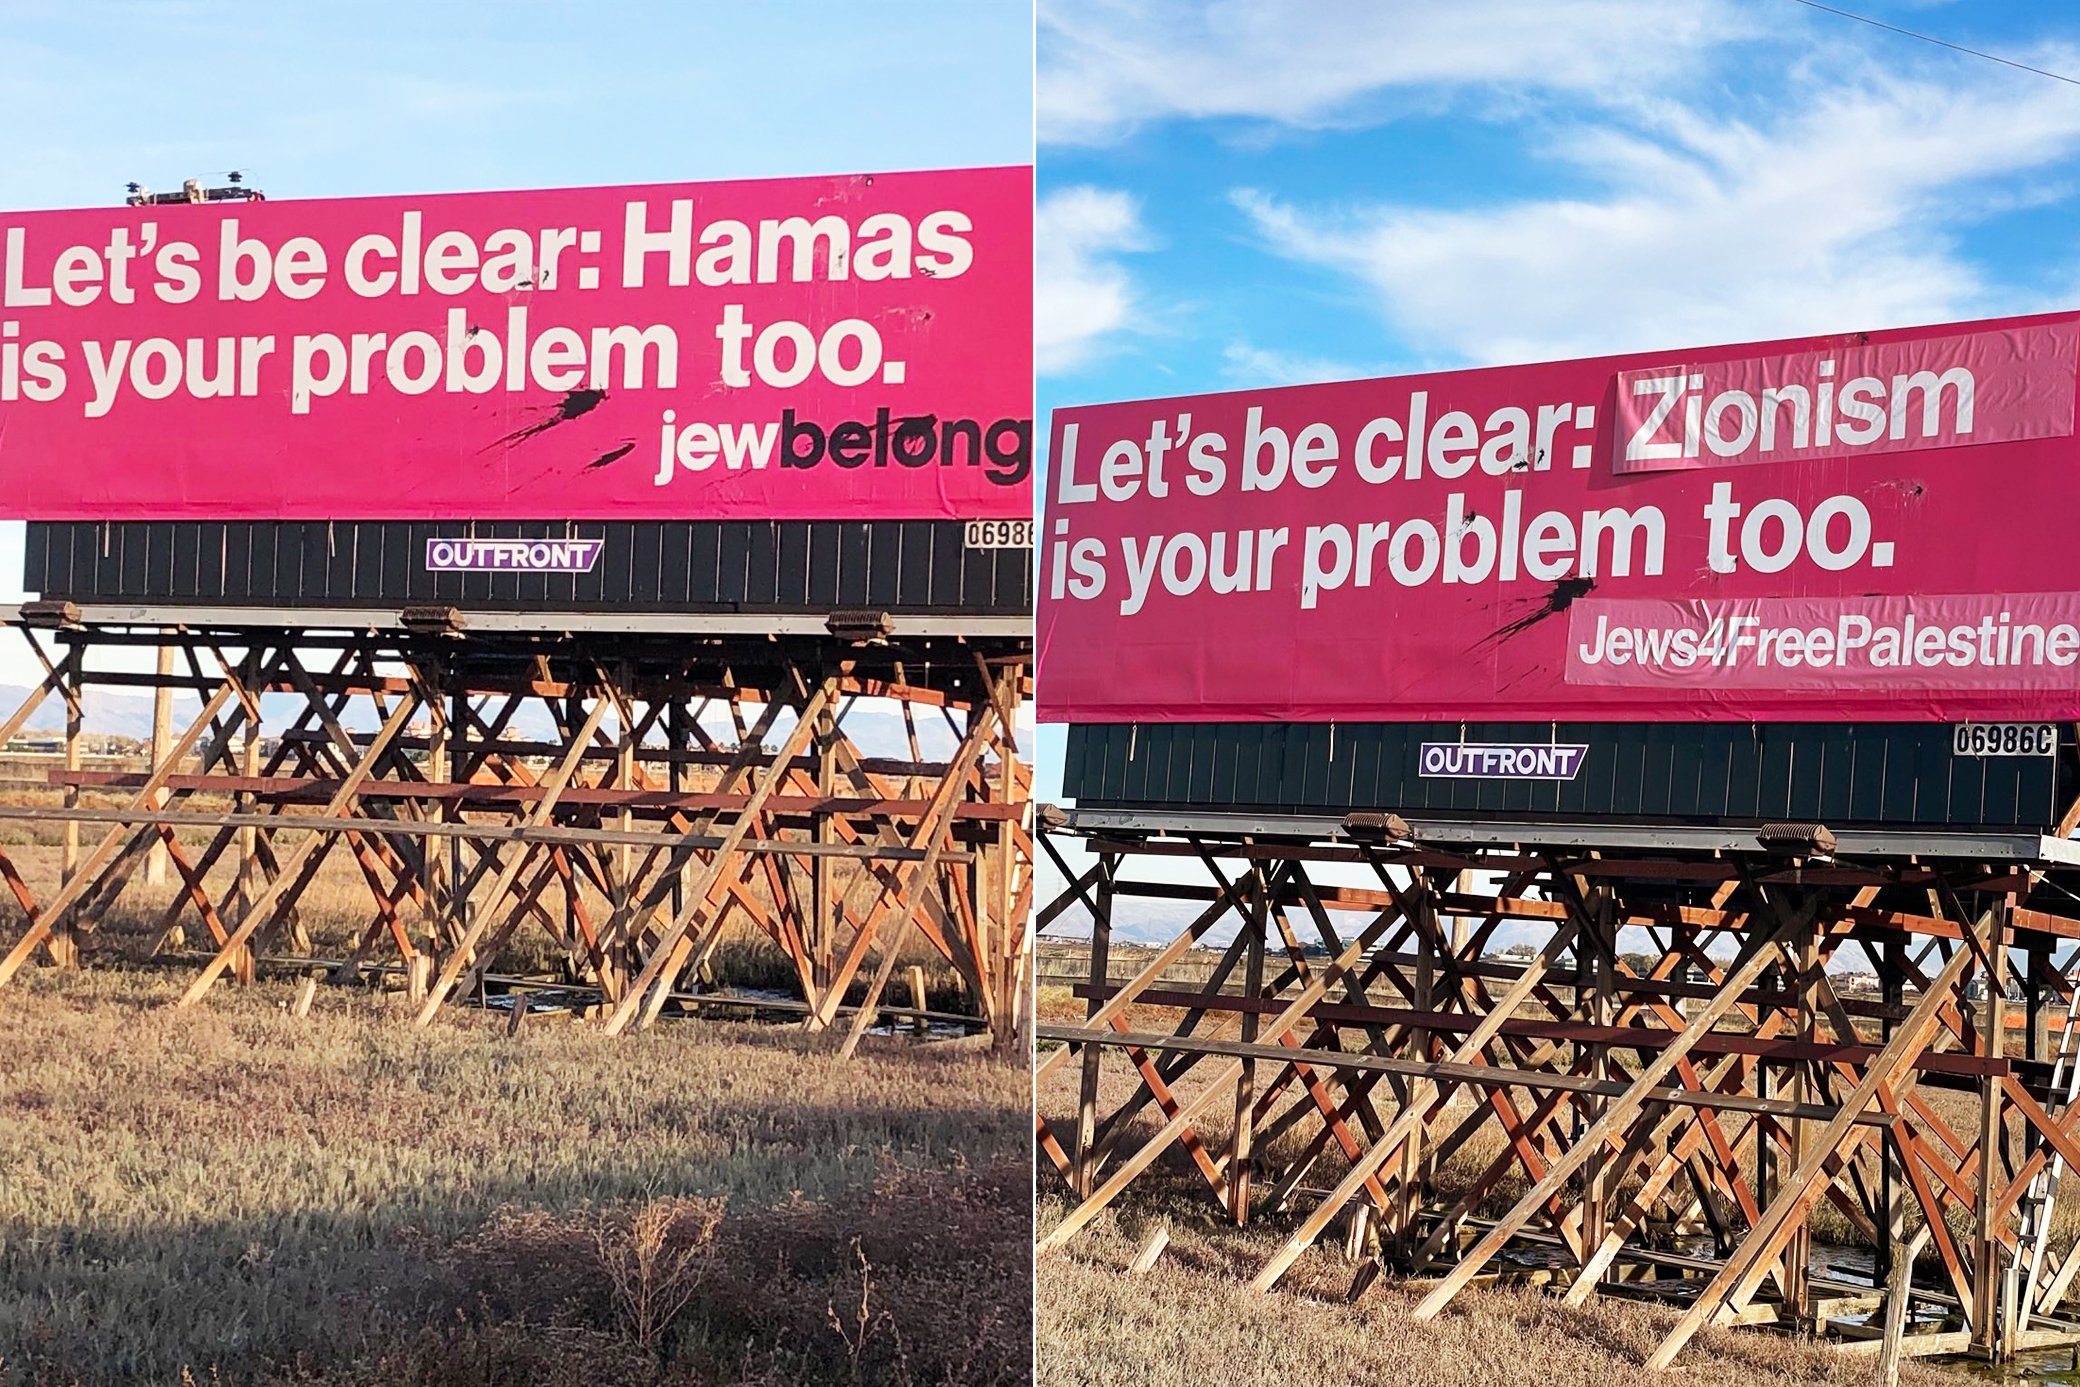 A billboard which reads “Lets be clear: Hamas is your problem too. Jewbelong.org”, left, and the same billboard defaced with “Lets be clear: Zionsim is your problem too. Jews3FreePalestine.org.